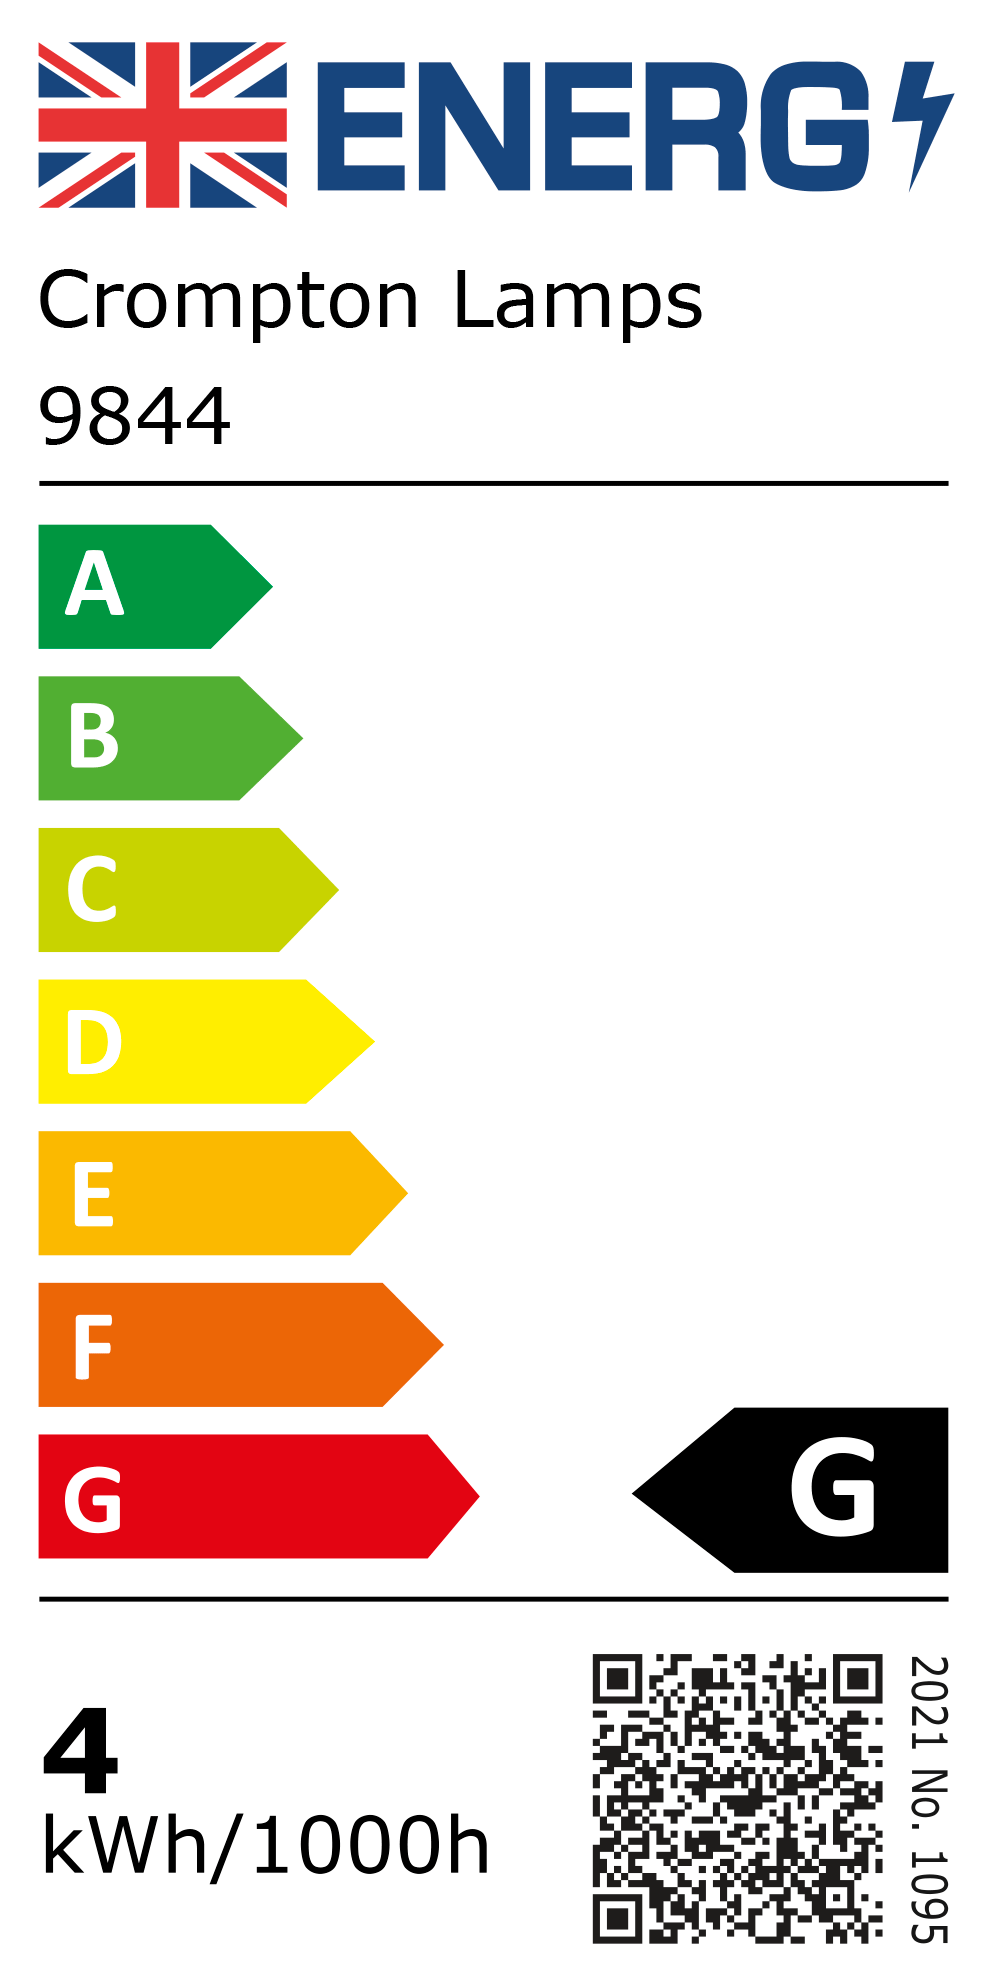 New 2021 Energy Rating Label: Stock Code 9844